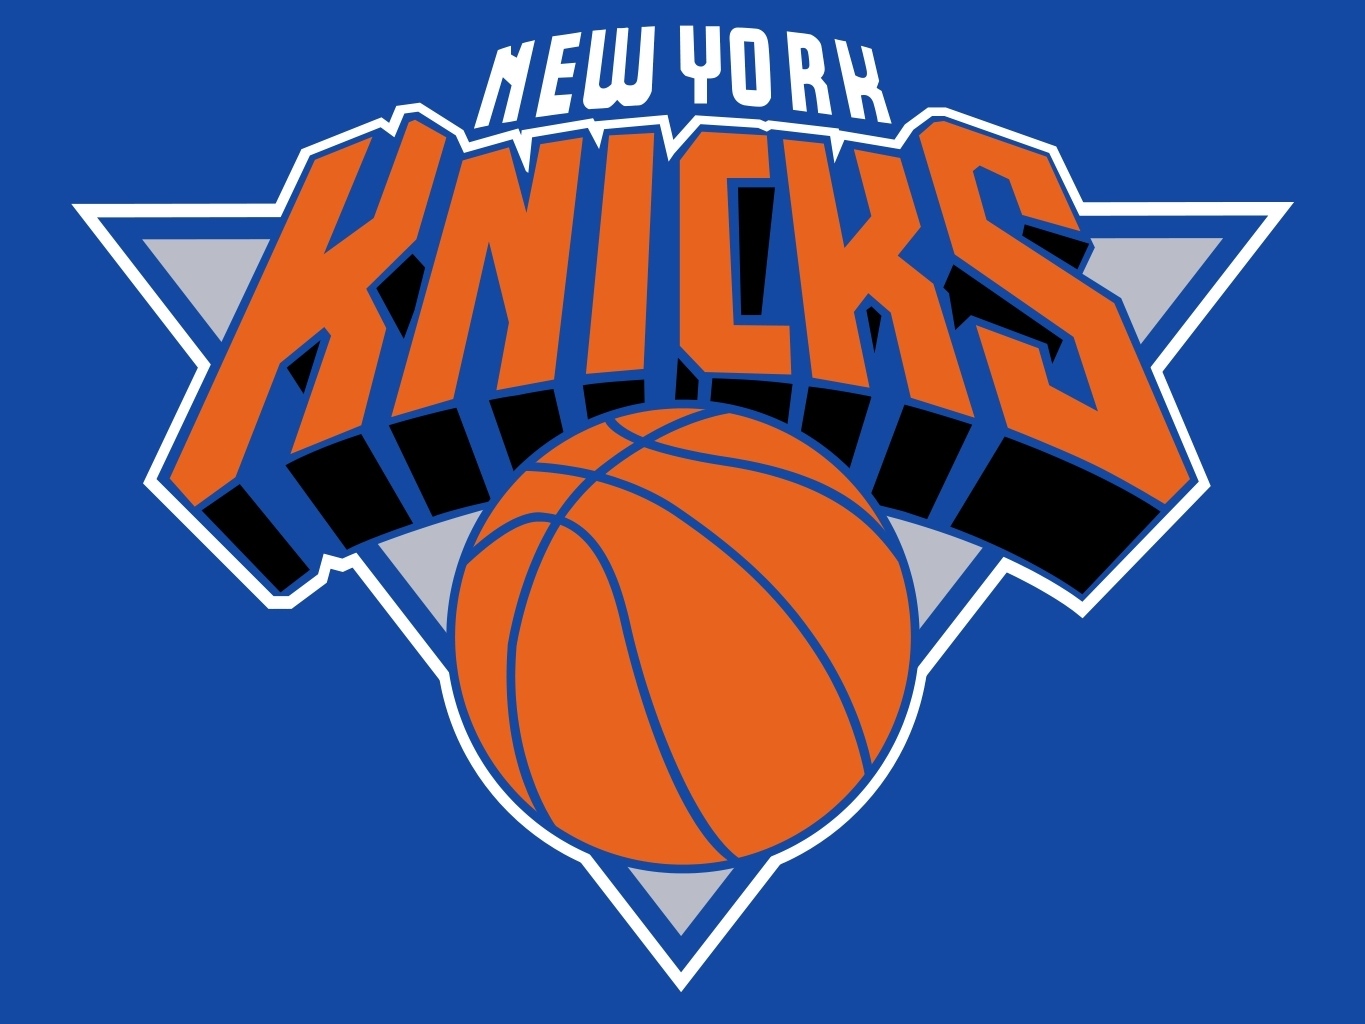 When Will The New York Knicks Odyssey End